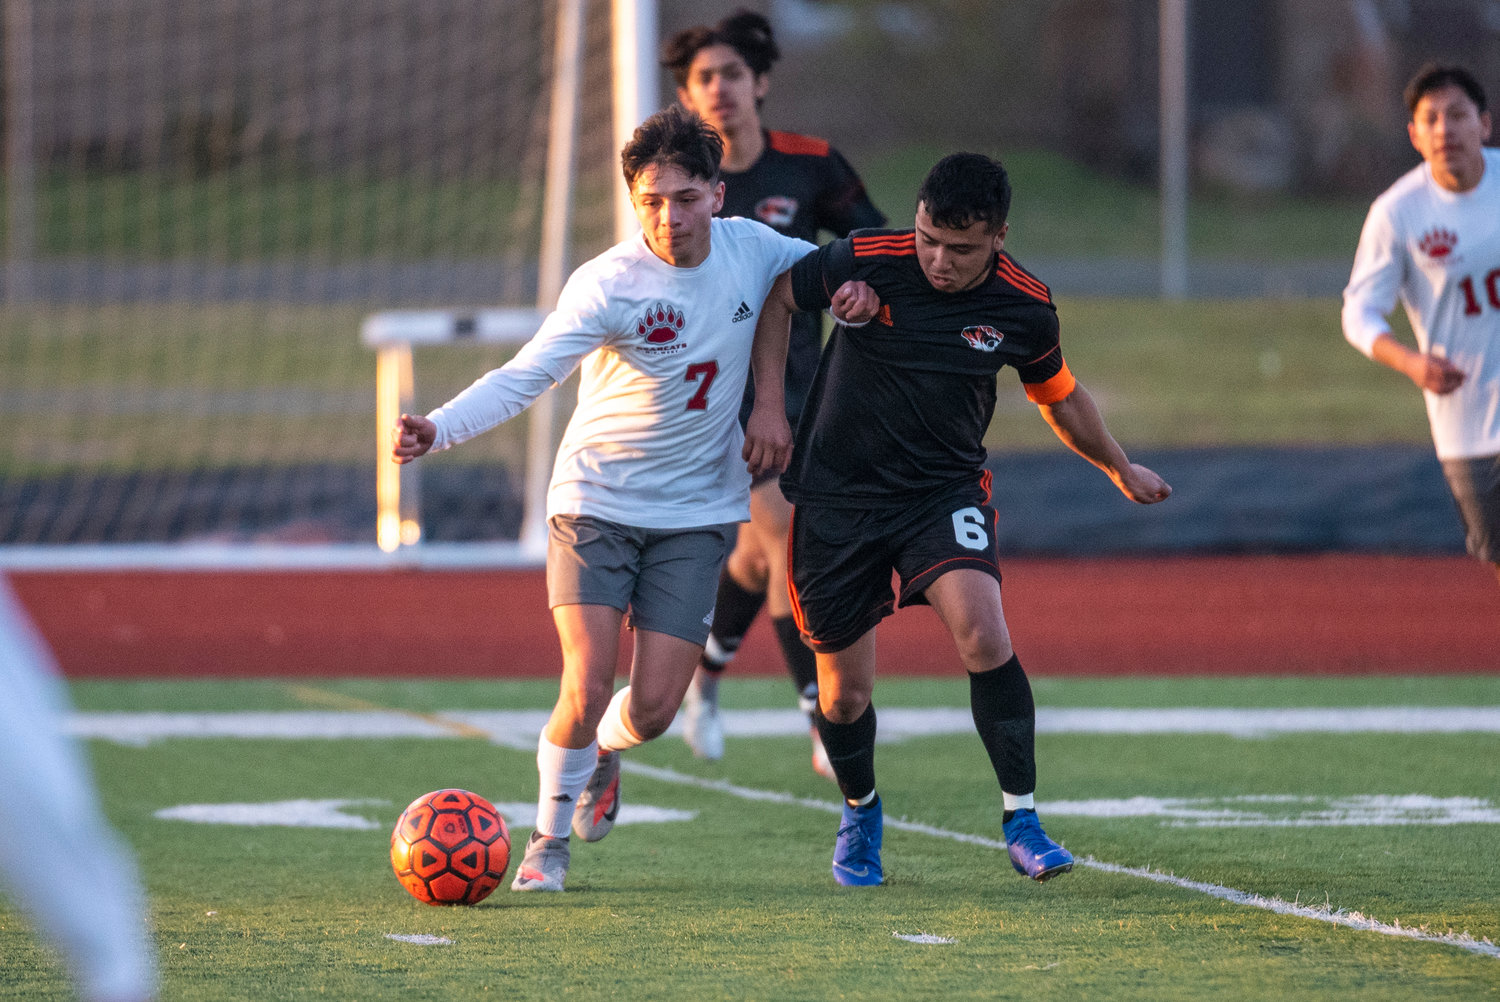 W.F. West's Damian Hernandez (7) and Centralia's Jamie Figuroa (6) battle for possession on April 22.